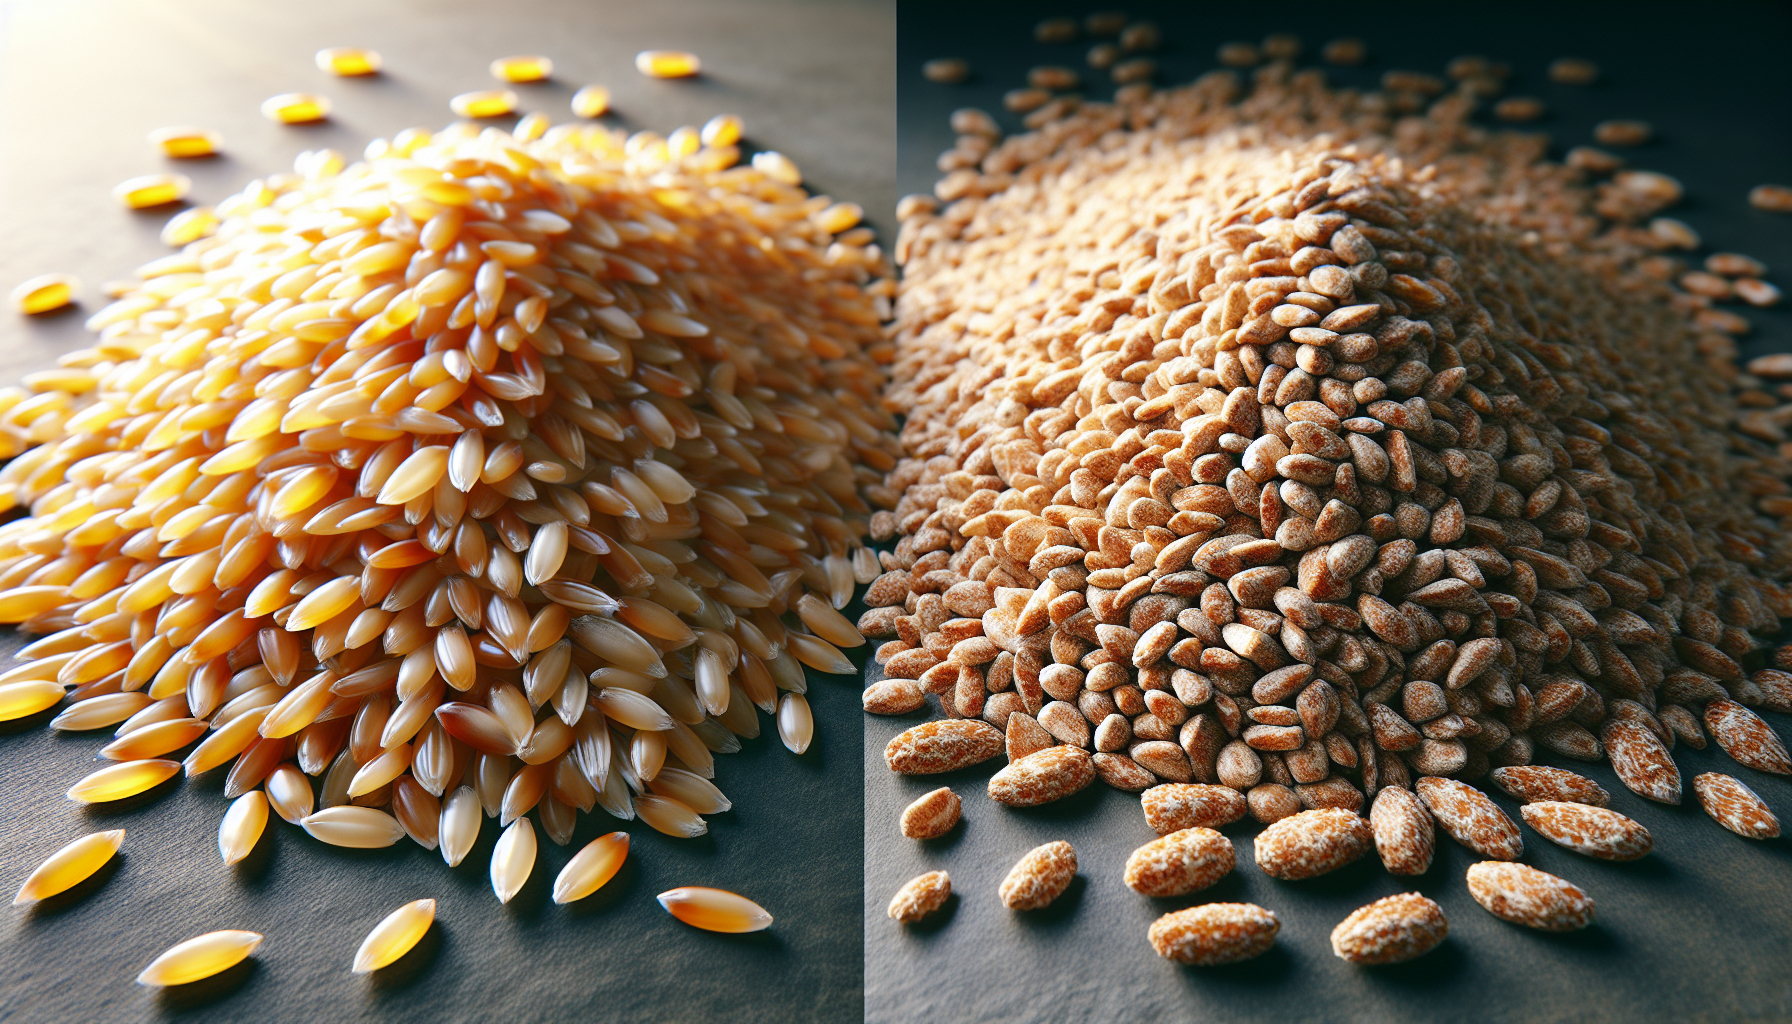 Comparison of nutrient-rich high test weight grains with lower test weight grains